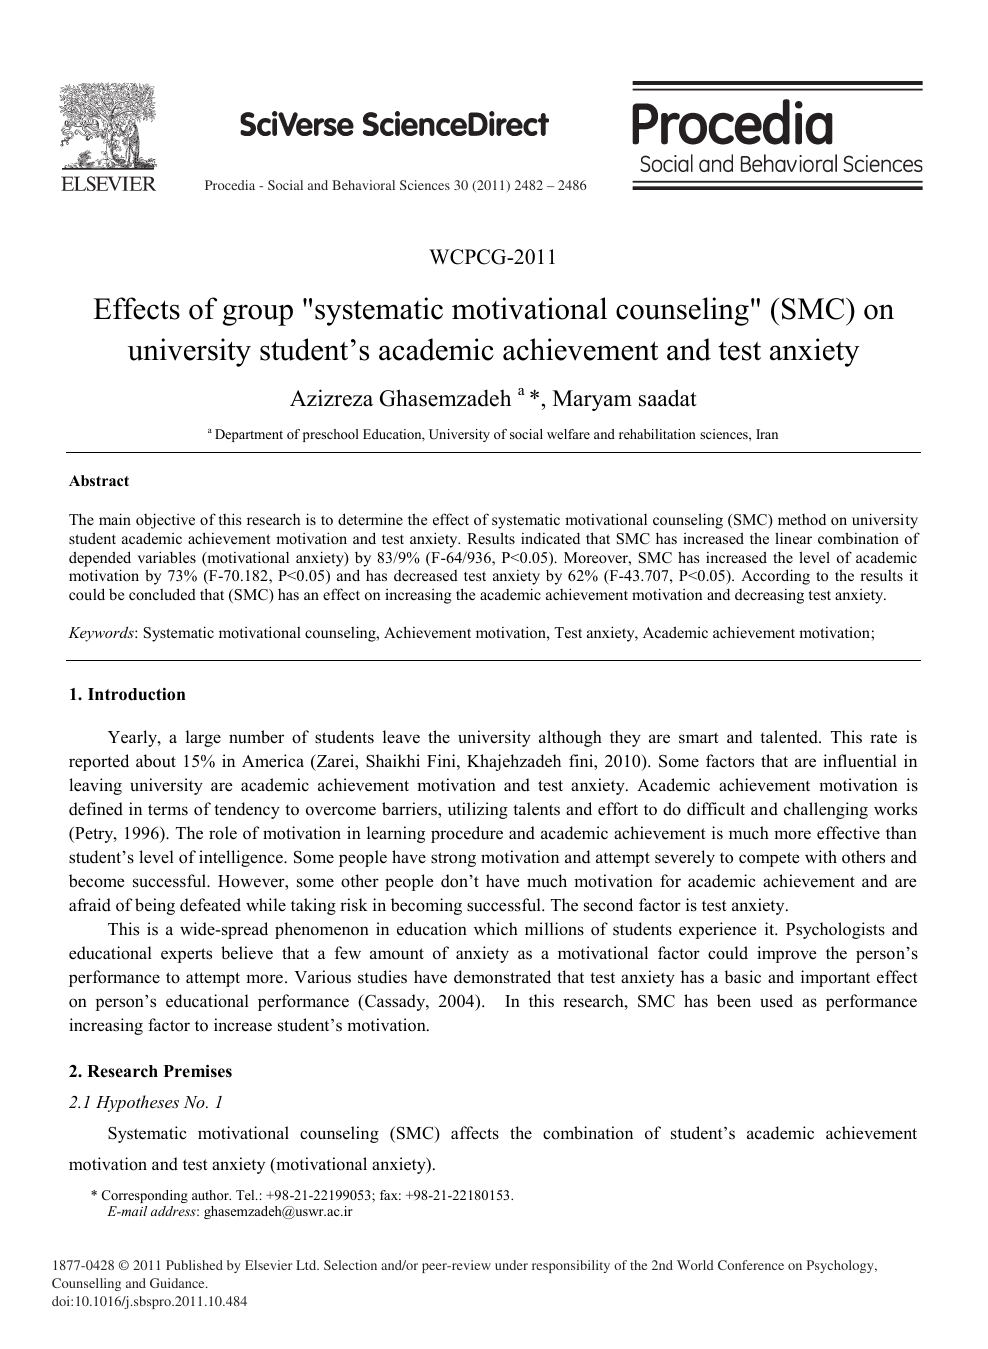 Effects of “systematic motivational counseling” (SMC) on university student's academic achievement and test anxiety – topic of research paper in Download scholarly article PDF and read for free on CyberLeninka